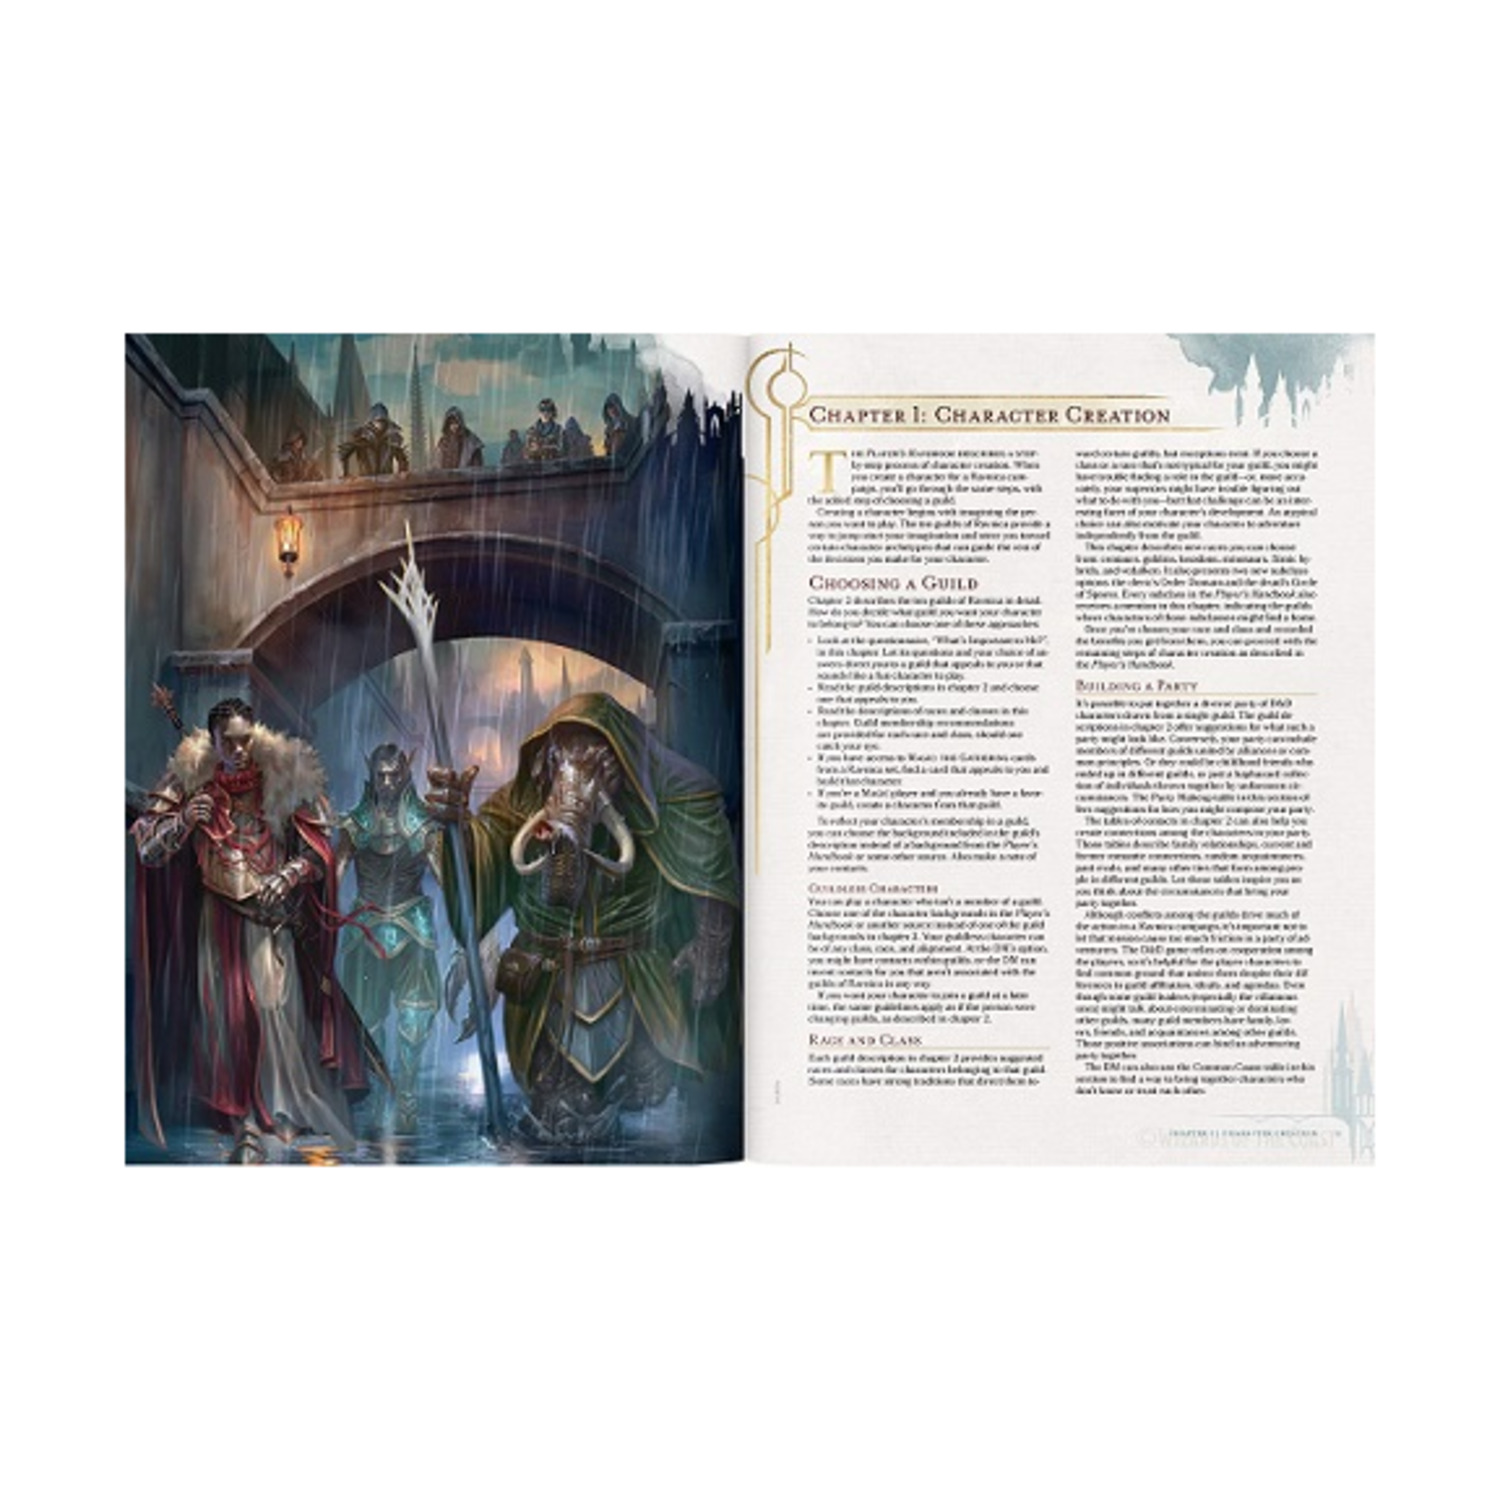 Dungeons & Dragons: Dungeons & Dragons Guildmasters' Guide to Ravnica (D&D/Magic: The Gathering Adventure Book and Campaign Setting) (Hardcover) - image 3 of 3